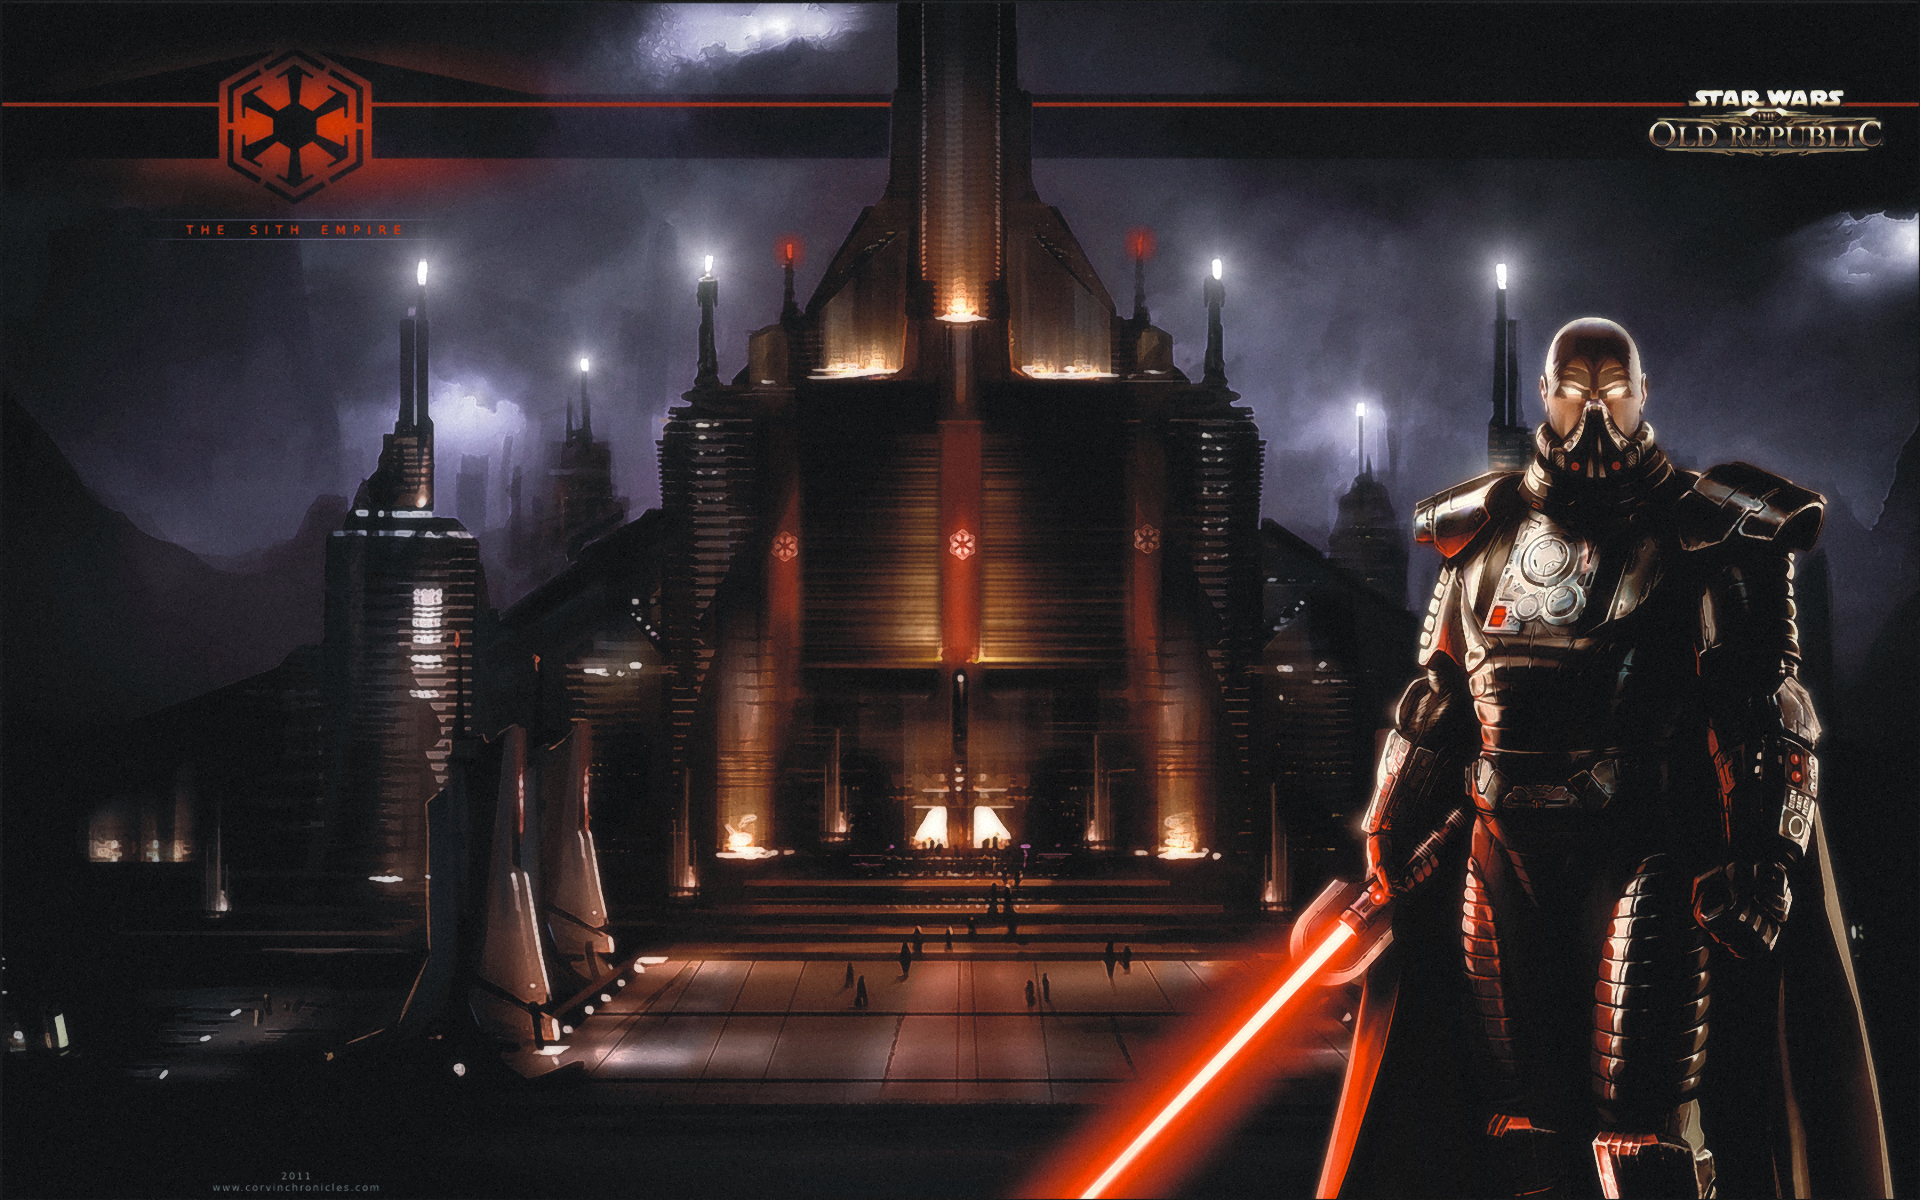 STAR WARS The Old Republic   Sith Republic Wallpapers 1920x1200